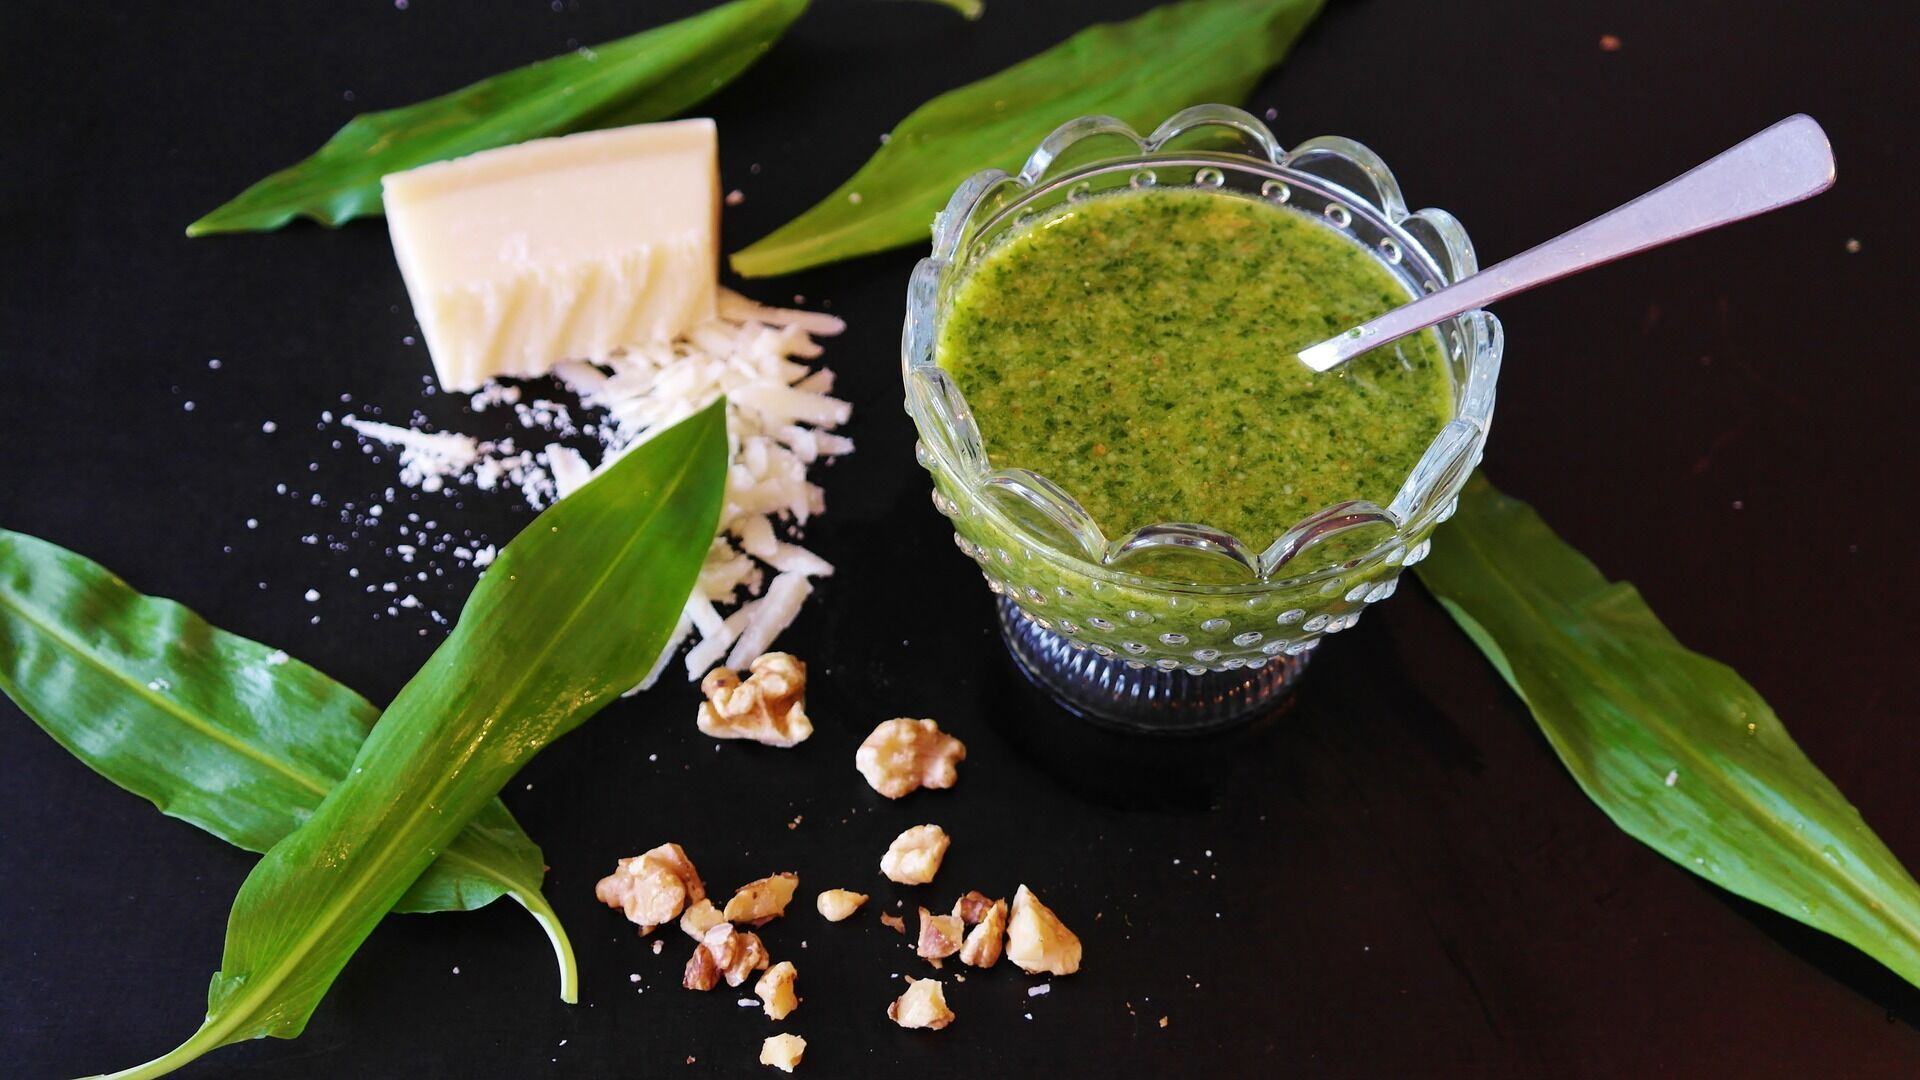 How to make a delicious pesto sauce at home